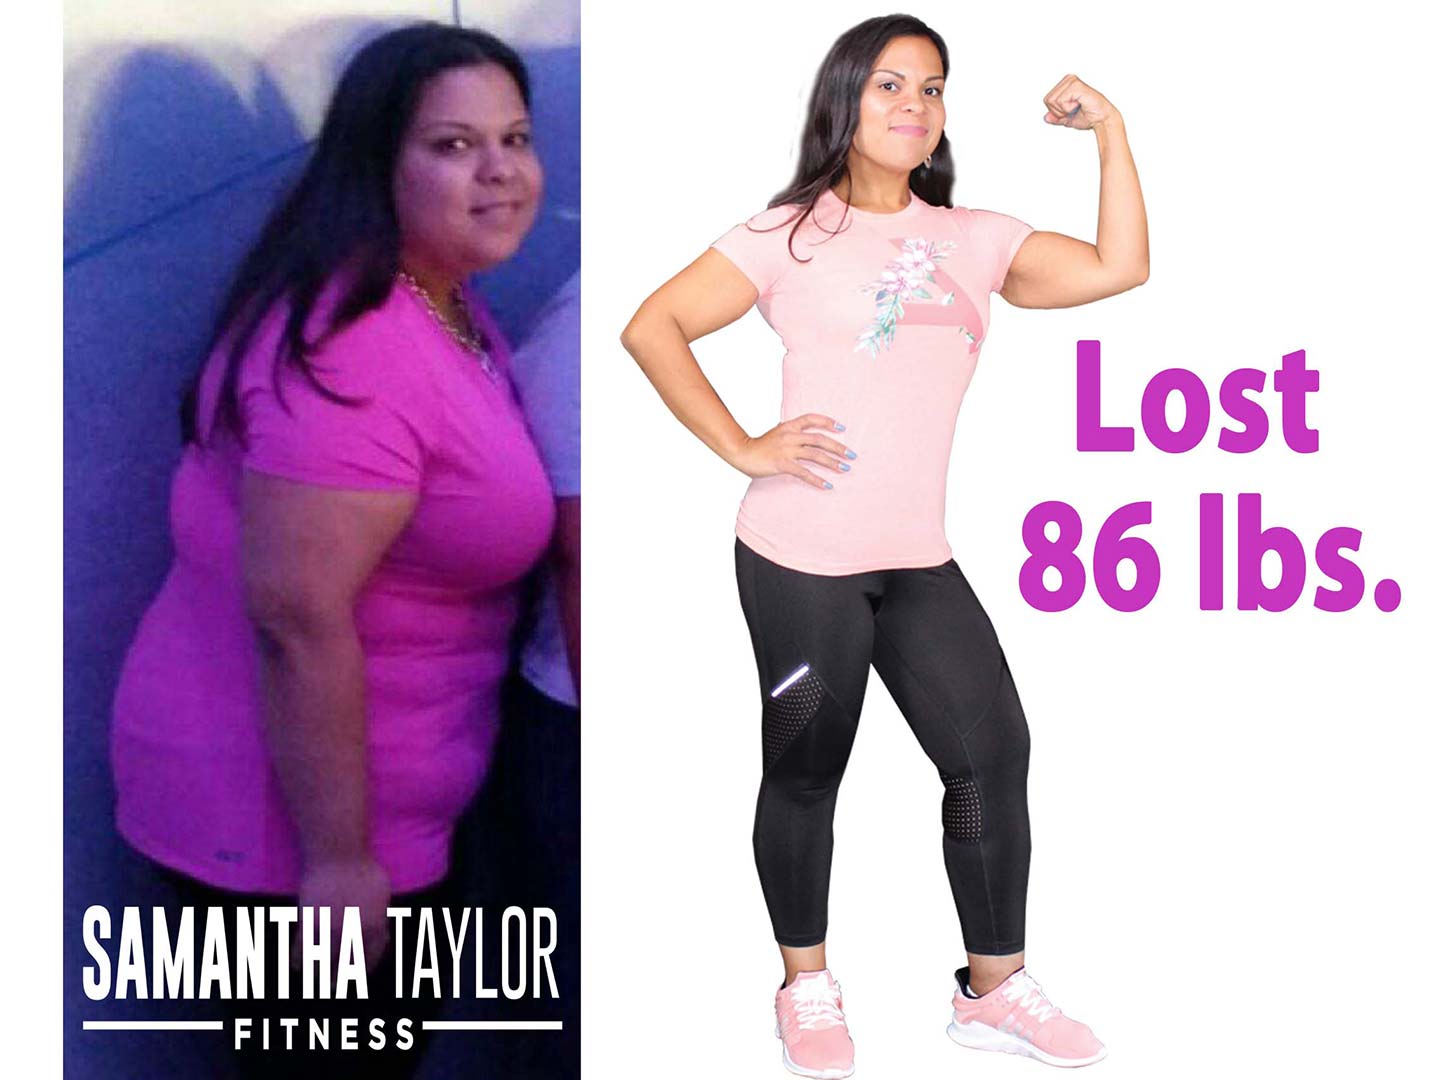 Carrollwood Boot Camp Client Lost 86 lbs.